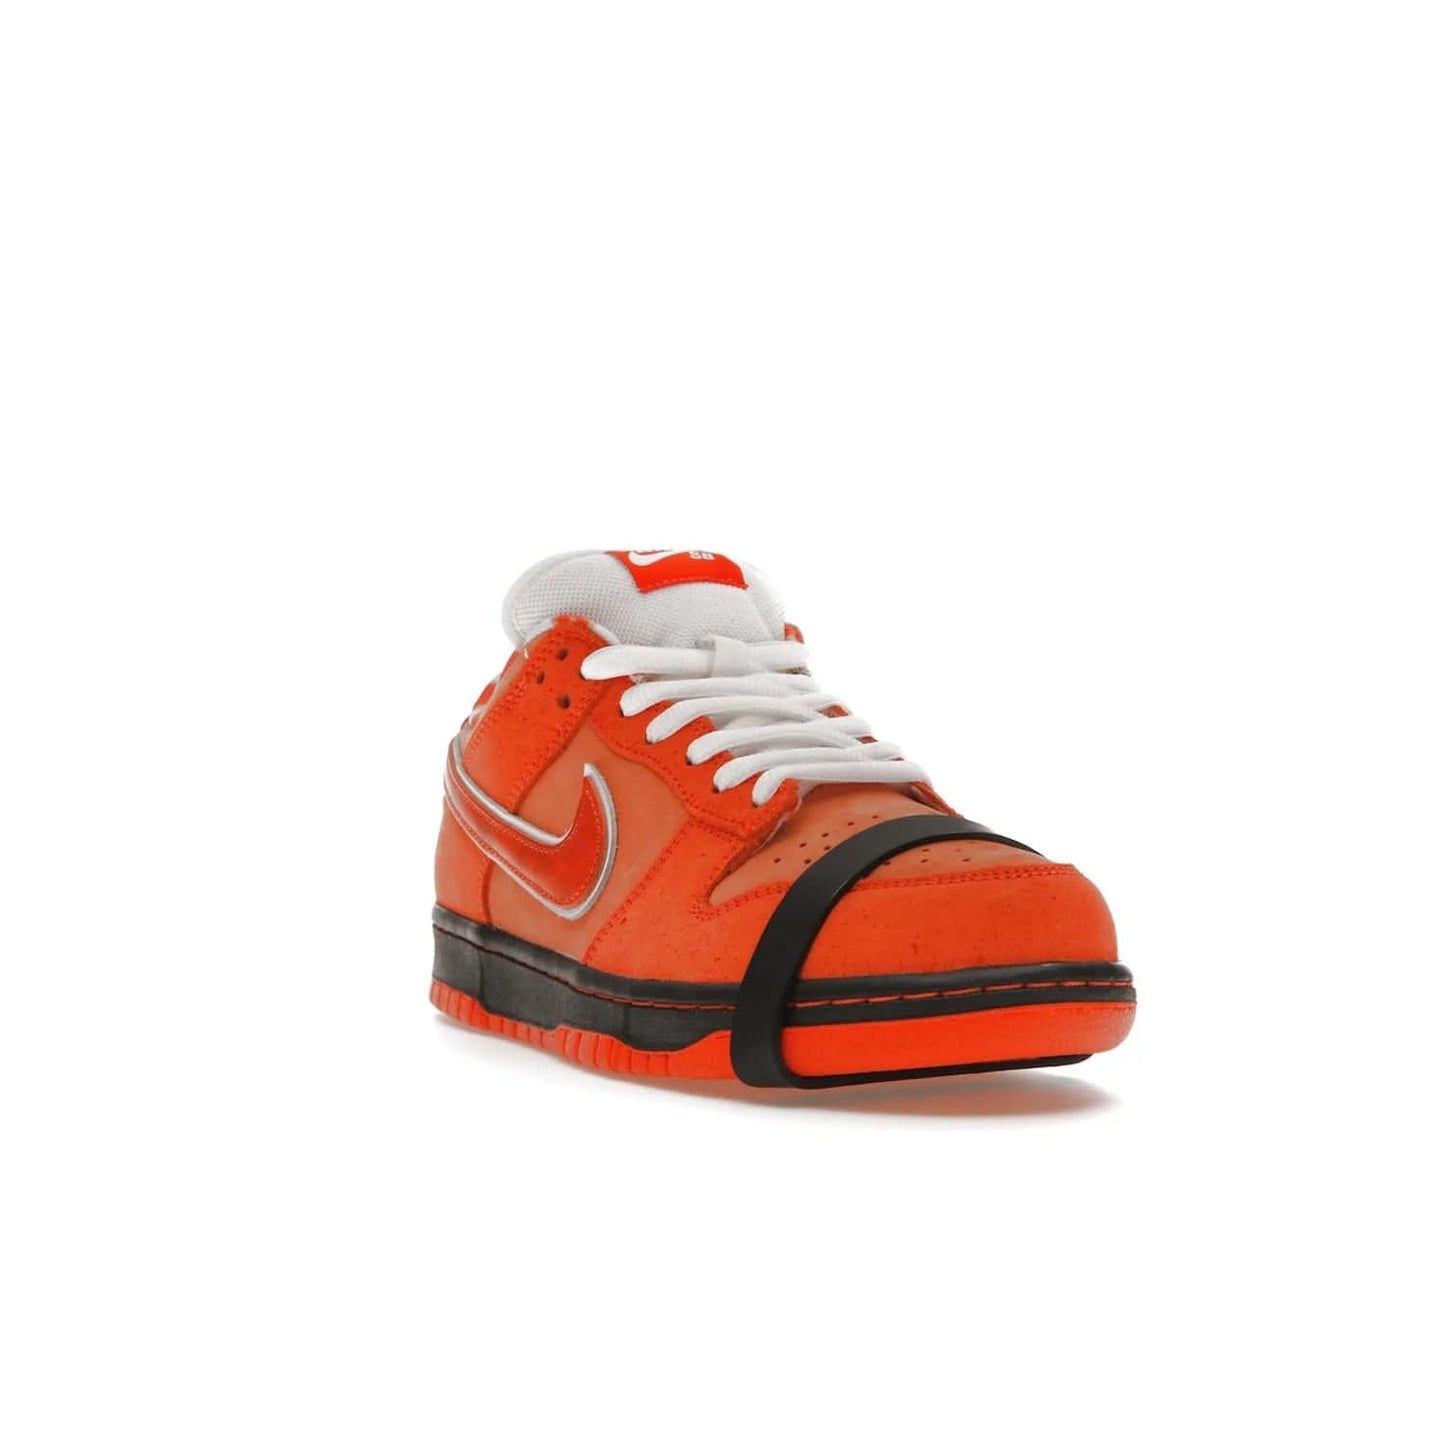 Nike SB Dunk Low Concepts Orange Lobster - Image 7 - Only at www.BallersClubKickz.com - Make a statement with the Nike SB Dunk Low Concepts Orange Lobster. Variety of orange hues, nubuck upper, bib-inspired lining & rubber outsole create bold look & comfortable blend of style. Available December 20th, 2022.